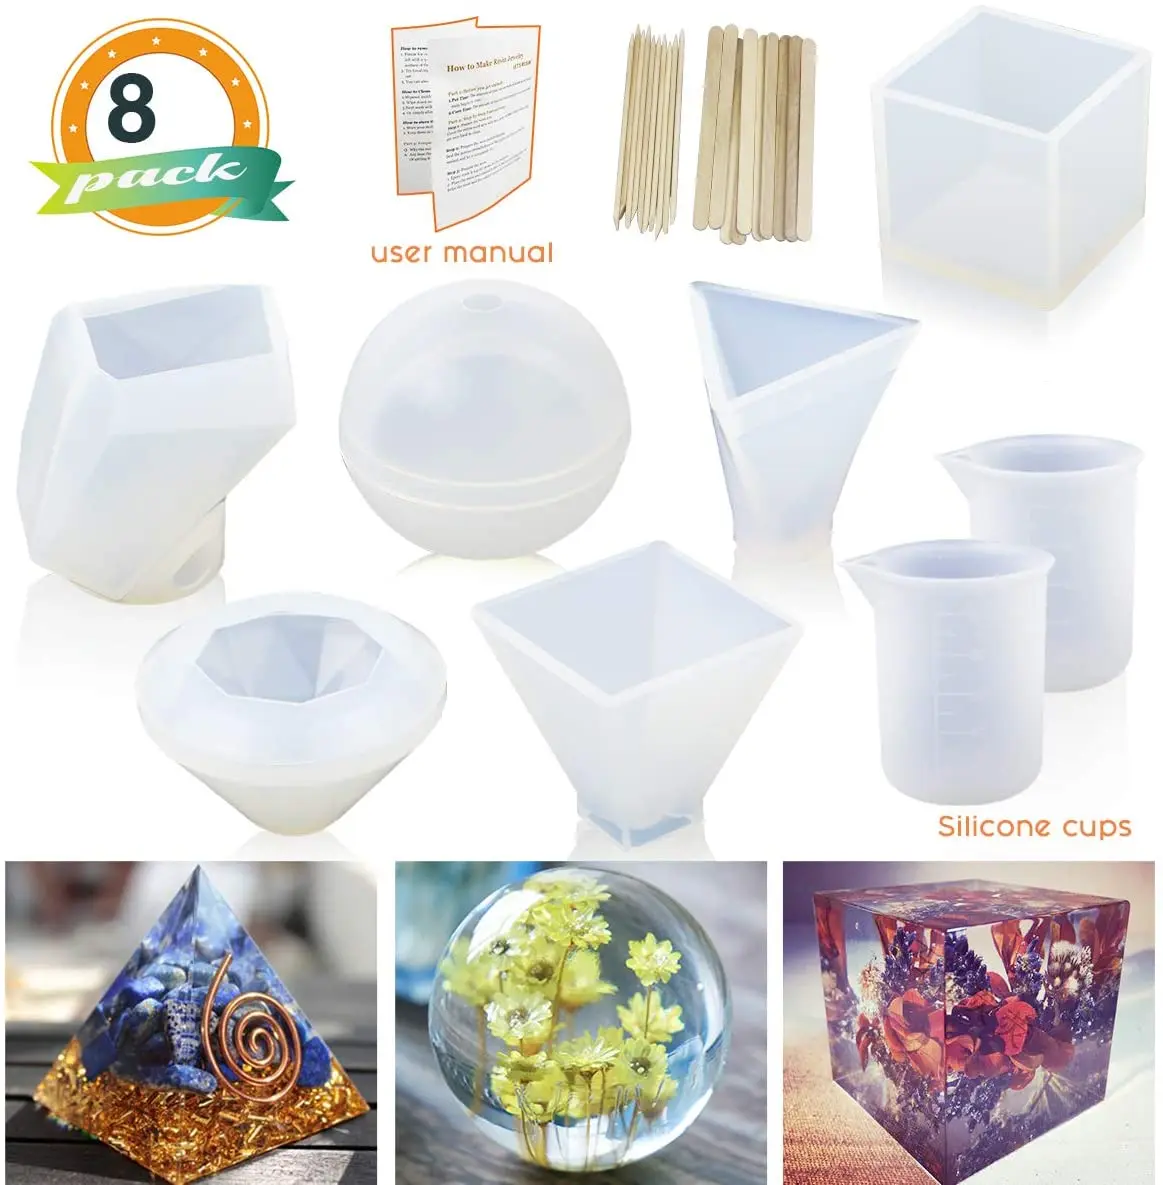 Cube Resin Casting Molds Set,8 Pcs Silicone Molds Epoxy Resin DIY Mold Tool Kit with Ball Pyramid Cone Shape Mould for DIY Craft Making